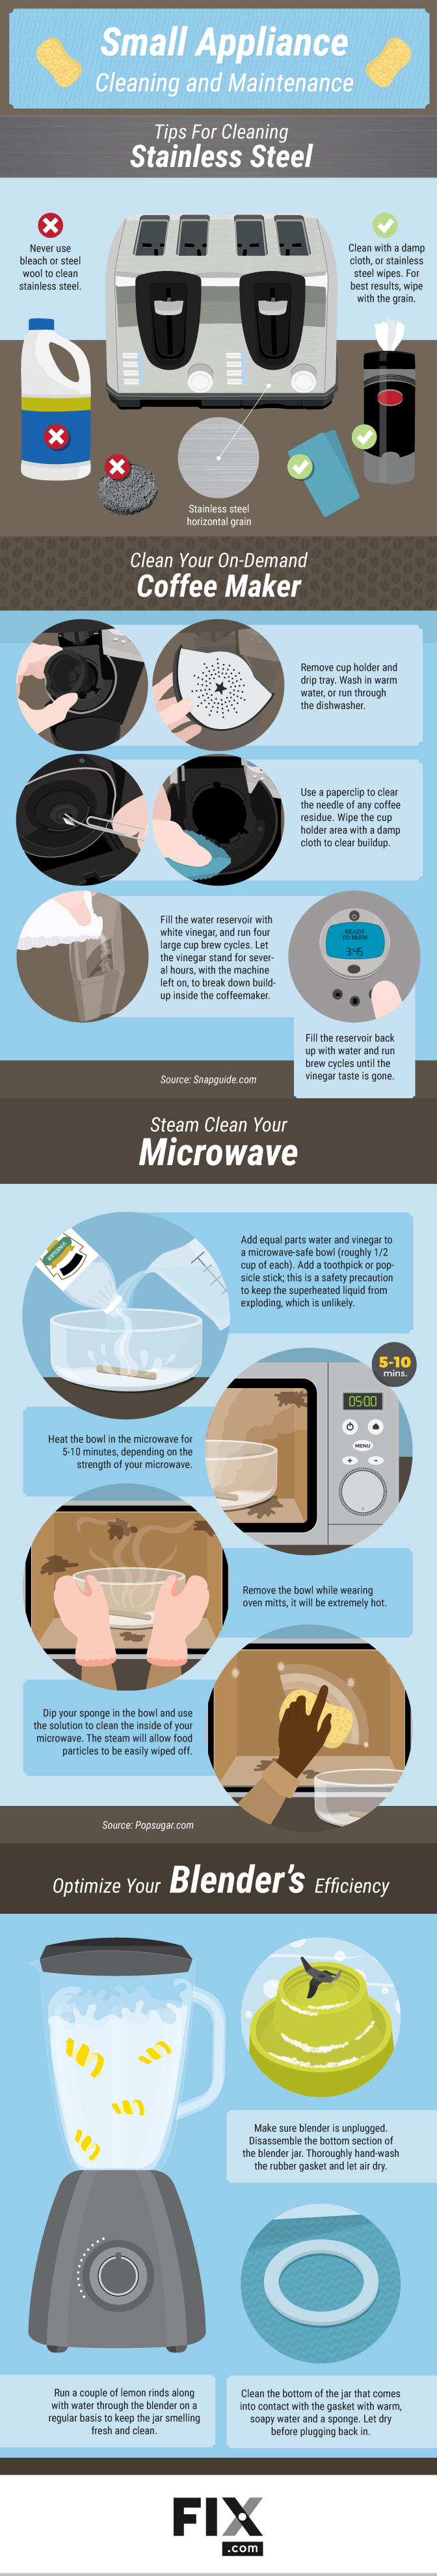 10 Simple Tricks for Cleaning Kitchen Appliances